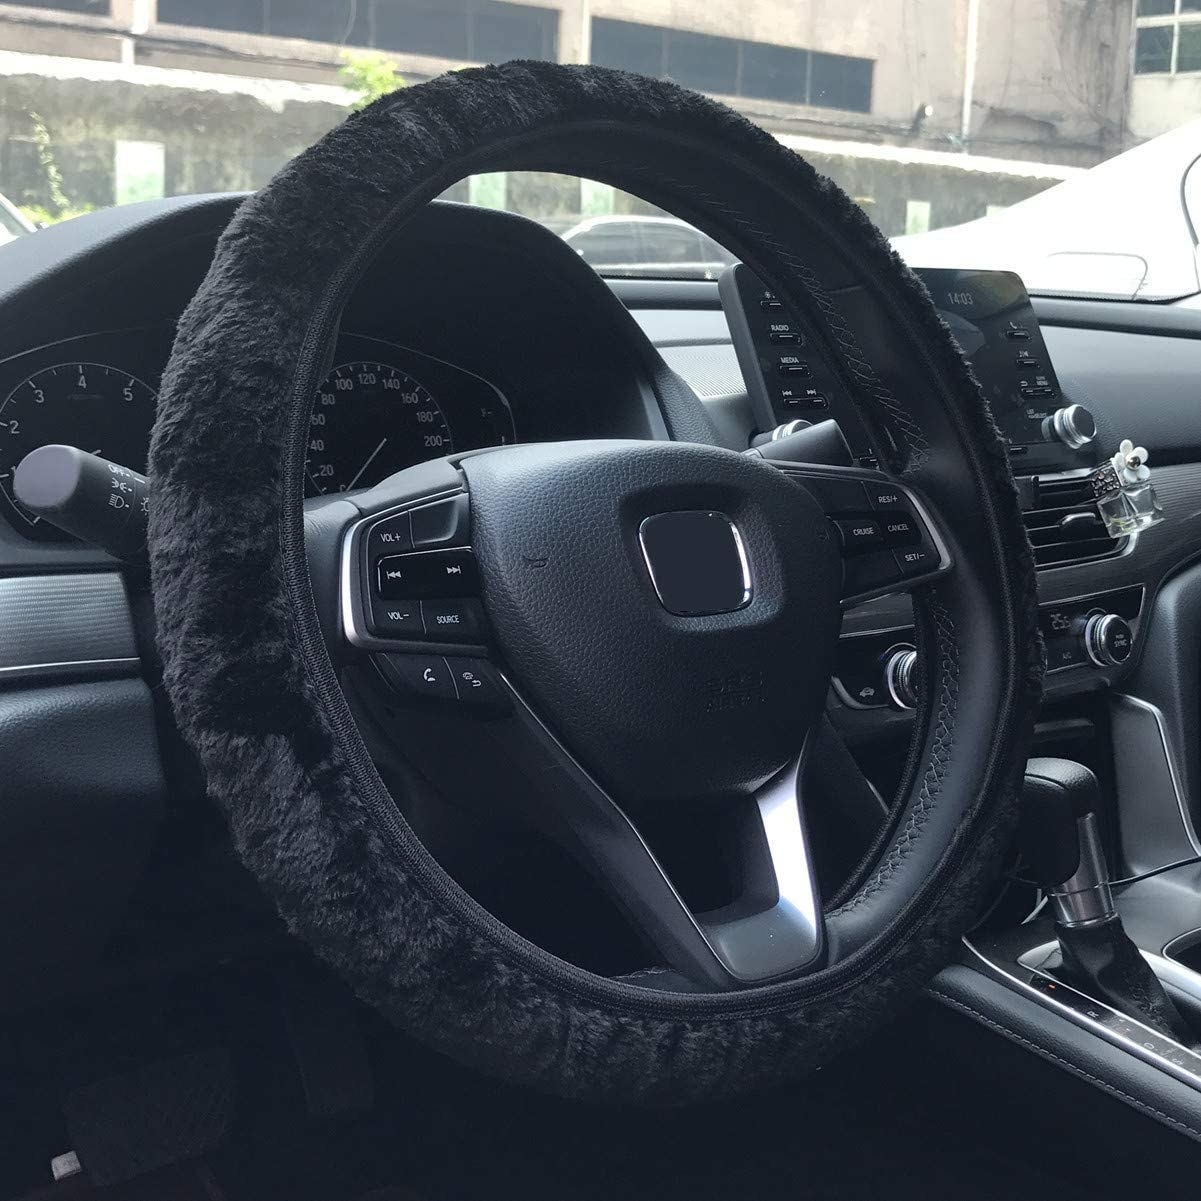 a fuzzy steering wheel cover